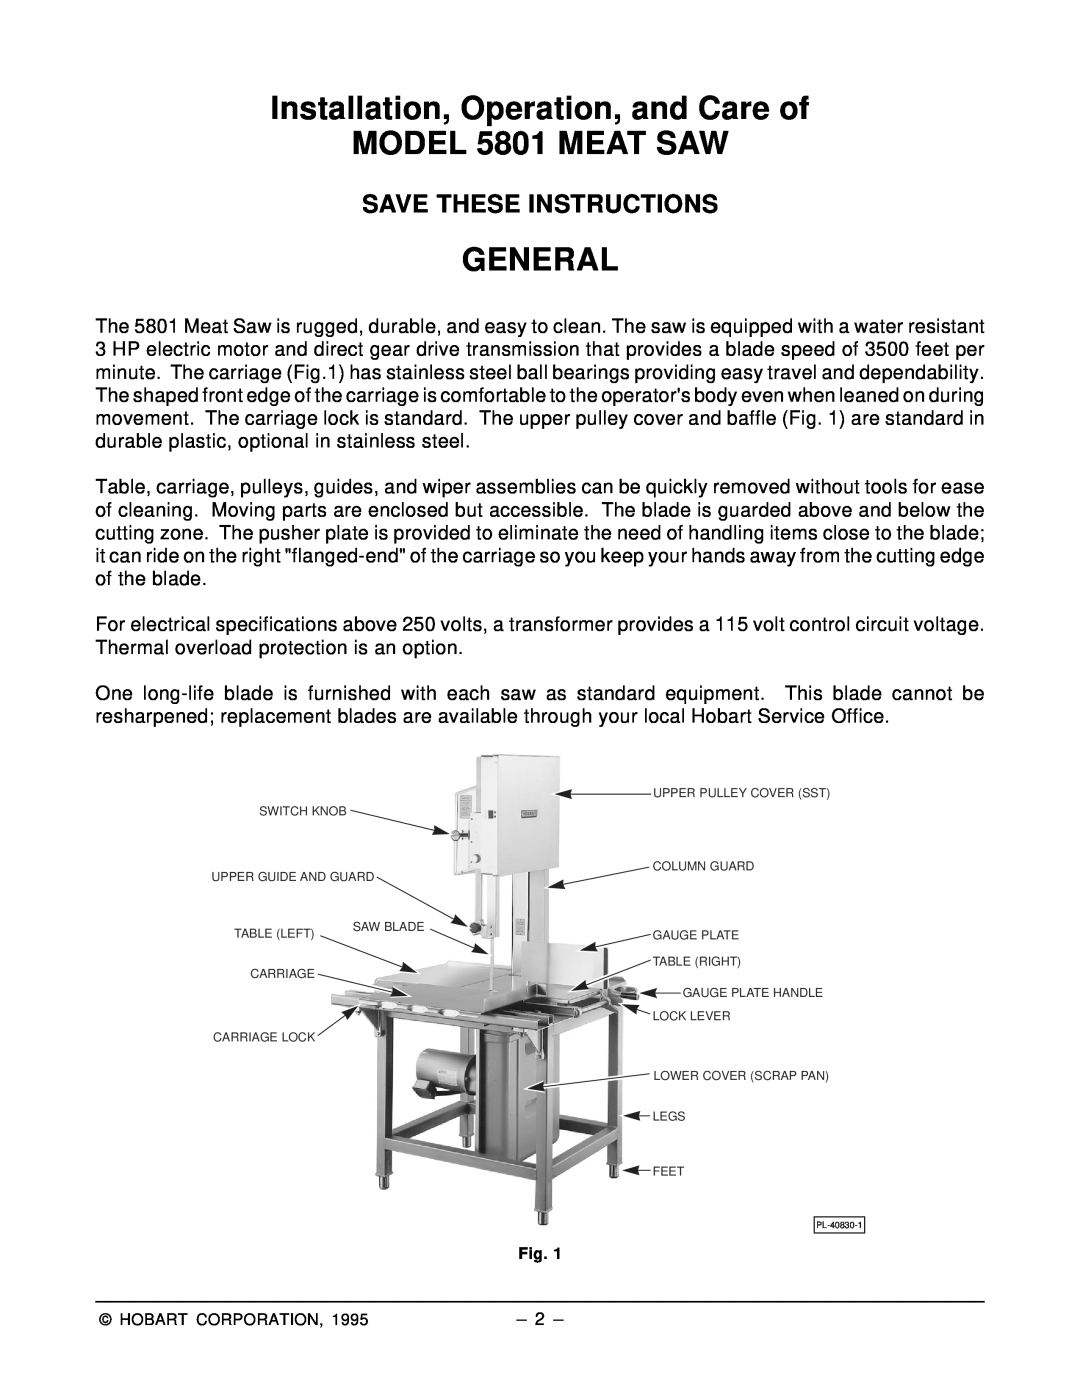 Hobart manual Installation, Operation, and Care of MODEL 5801 MEAT SAW, General, Save These Instructions 